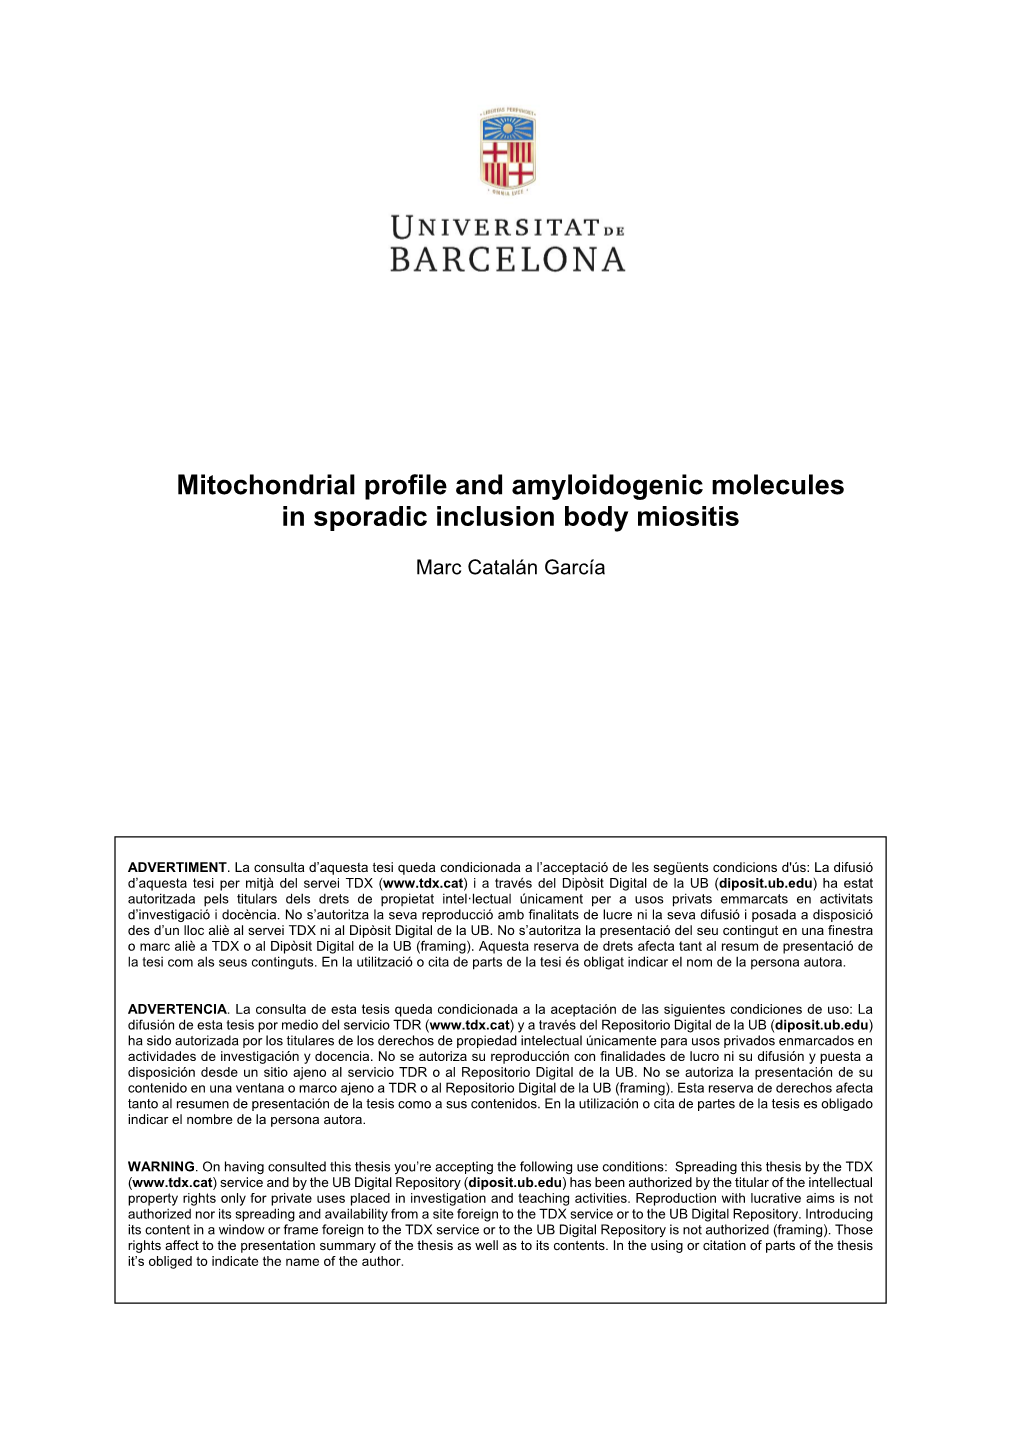 Mitochondrial Profile and Amyloidogenic Molecules in Sporadic Inclusion Body Miositis